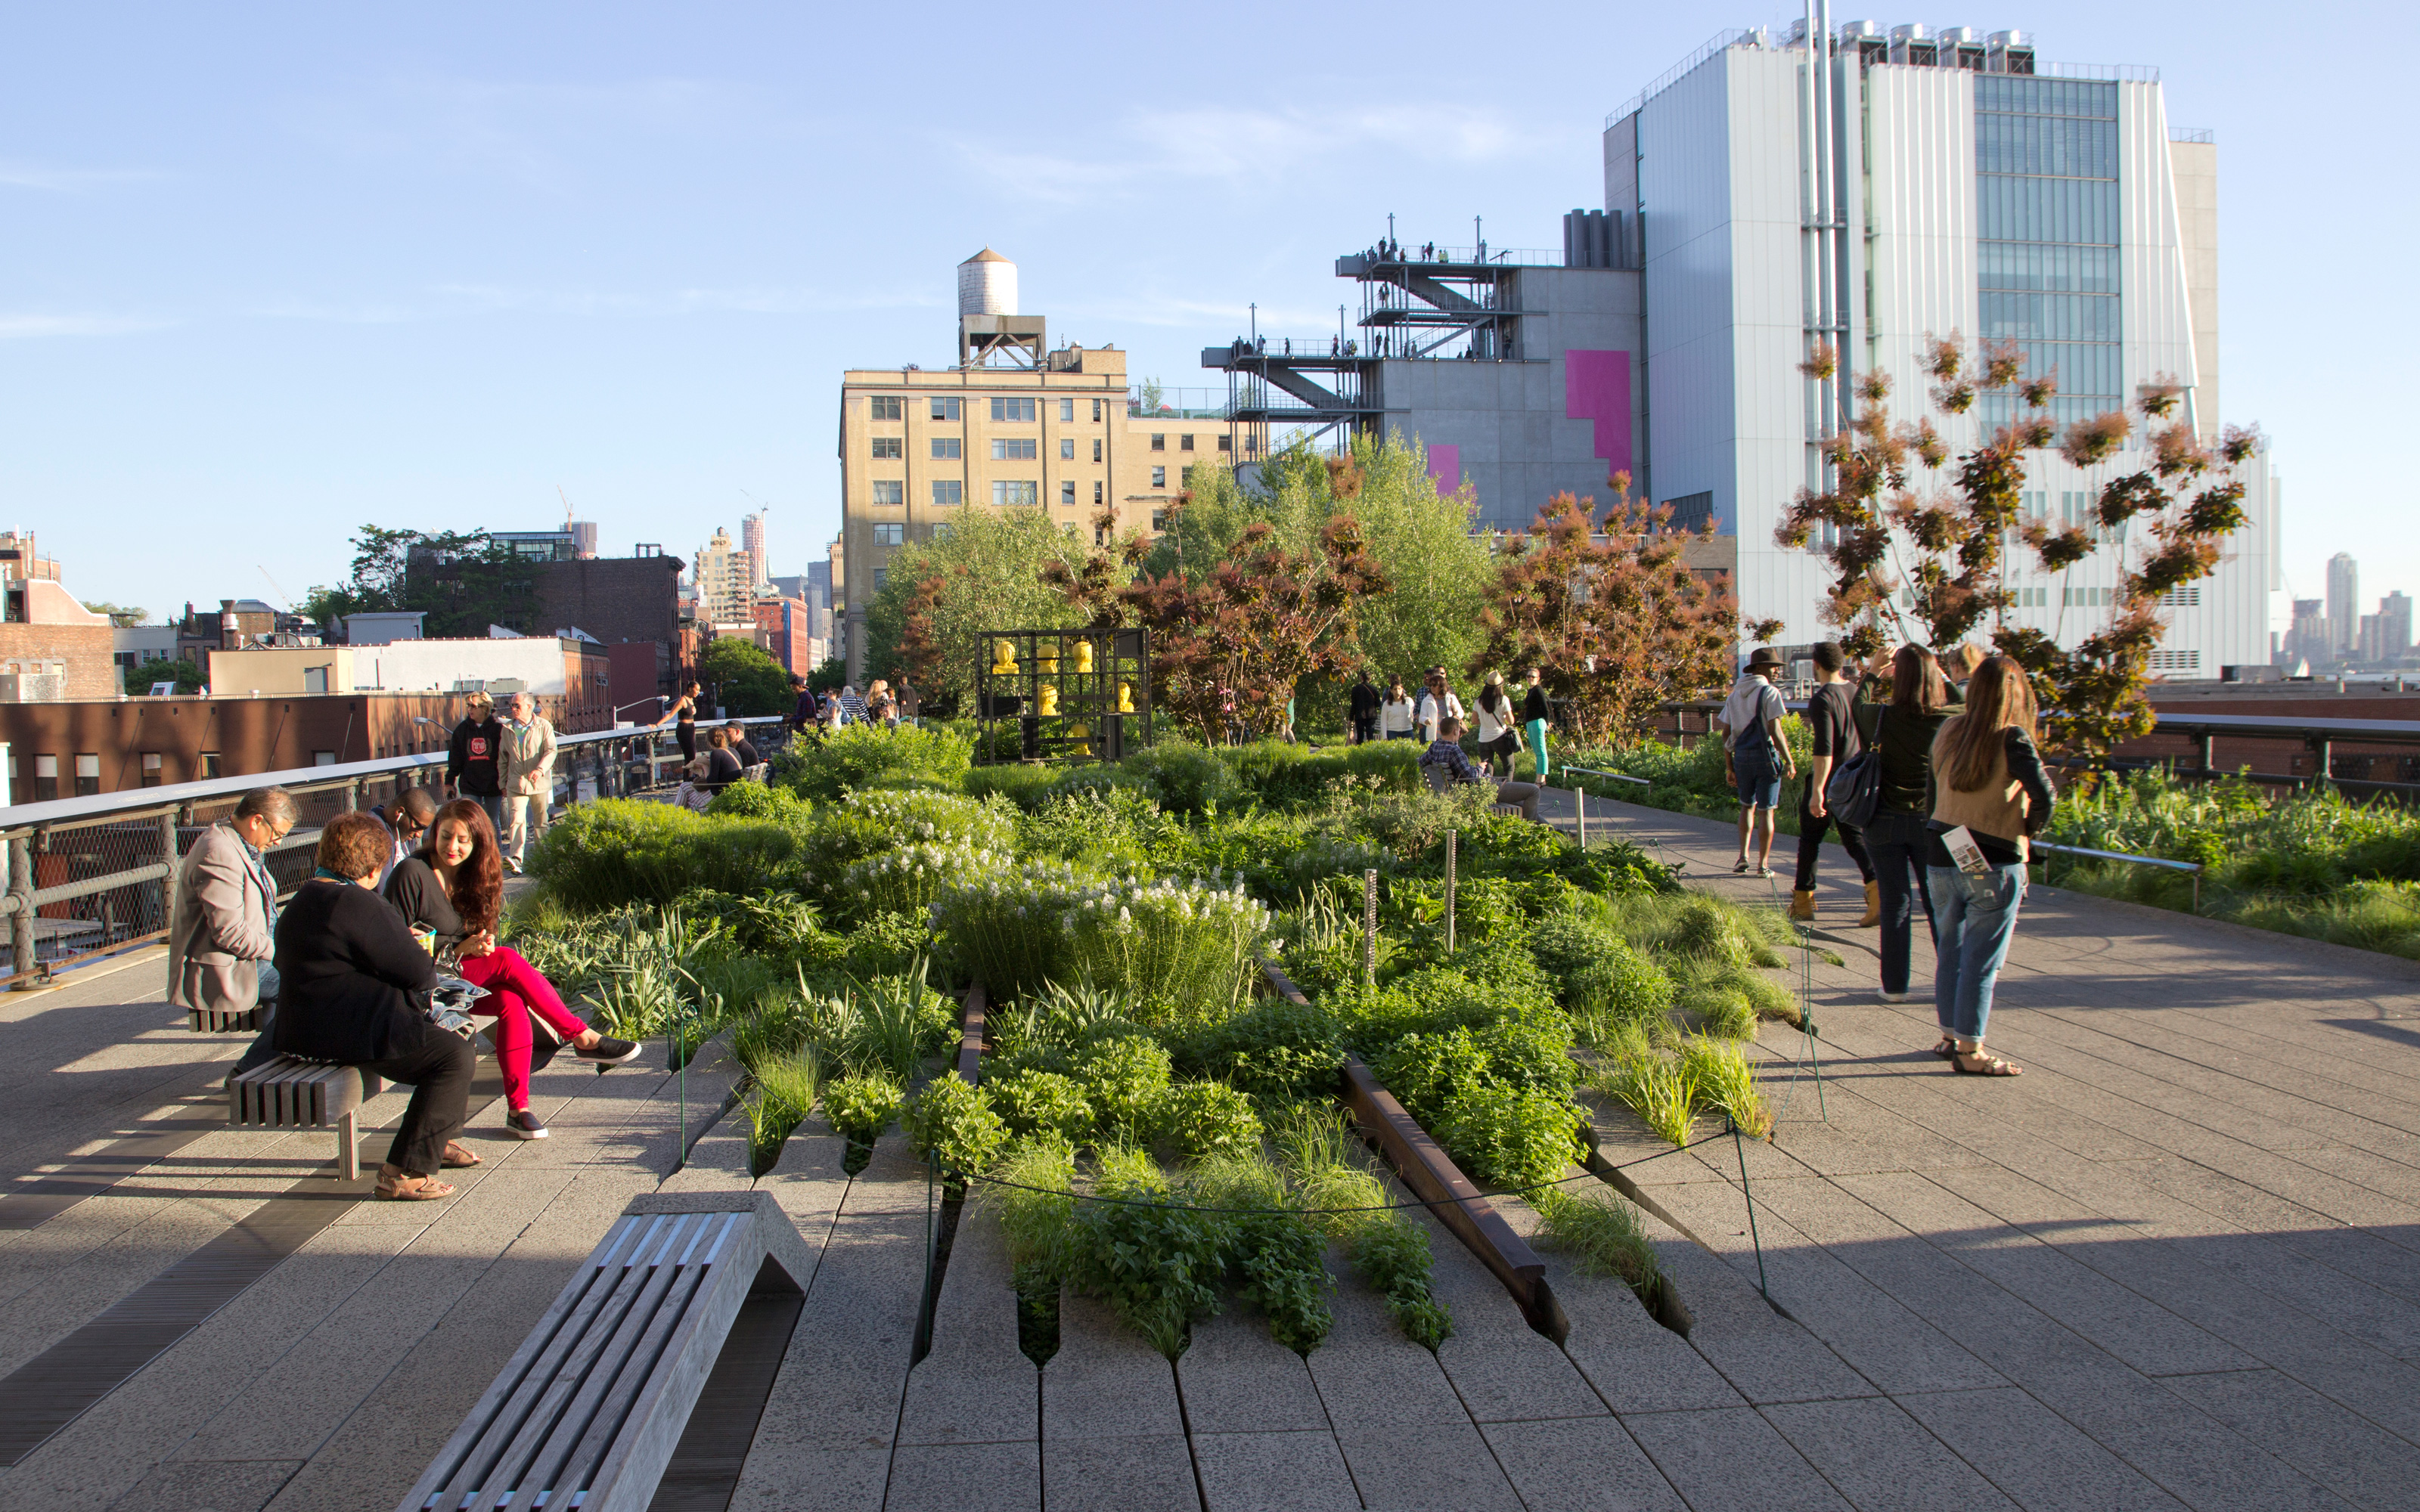 The High Line with walkways and vegetated rails